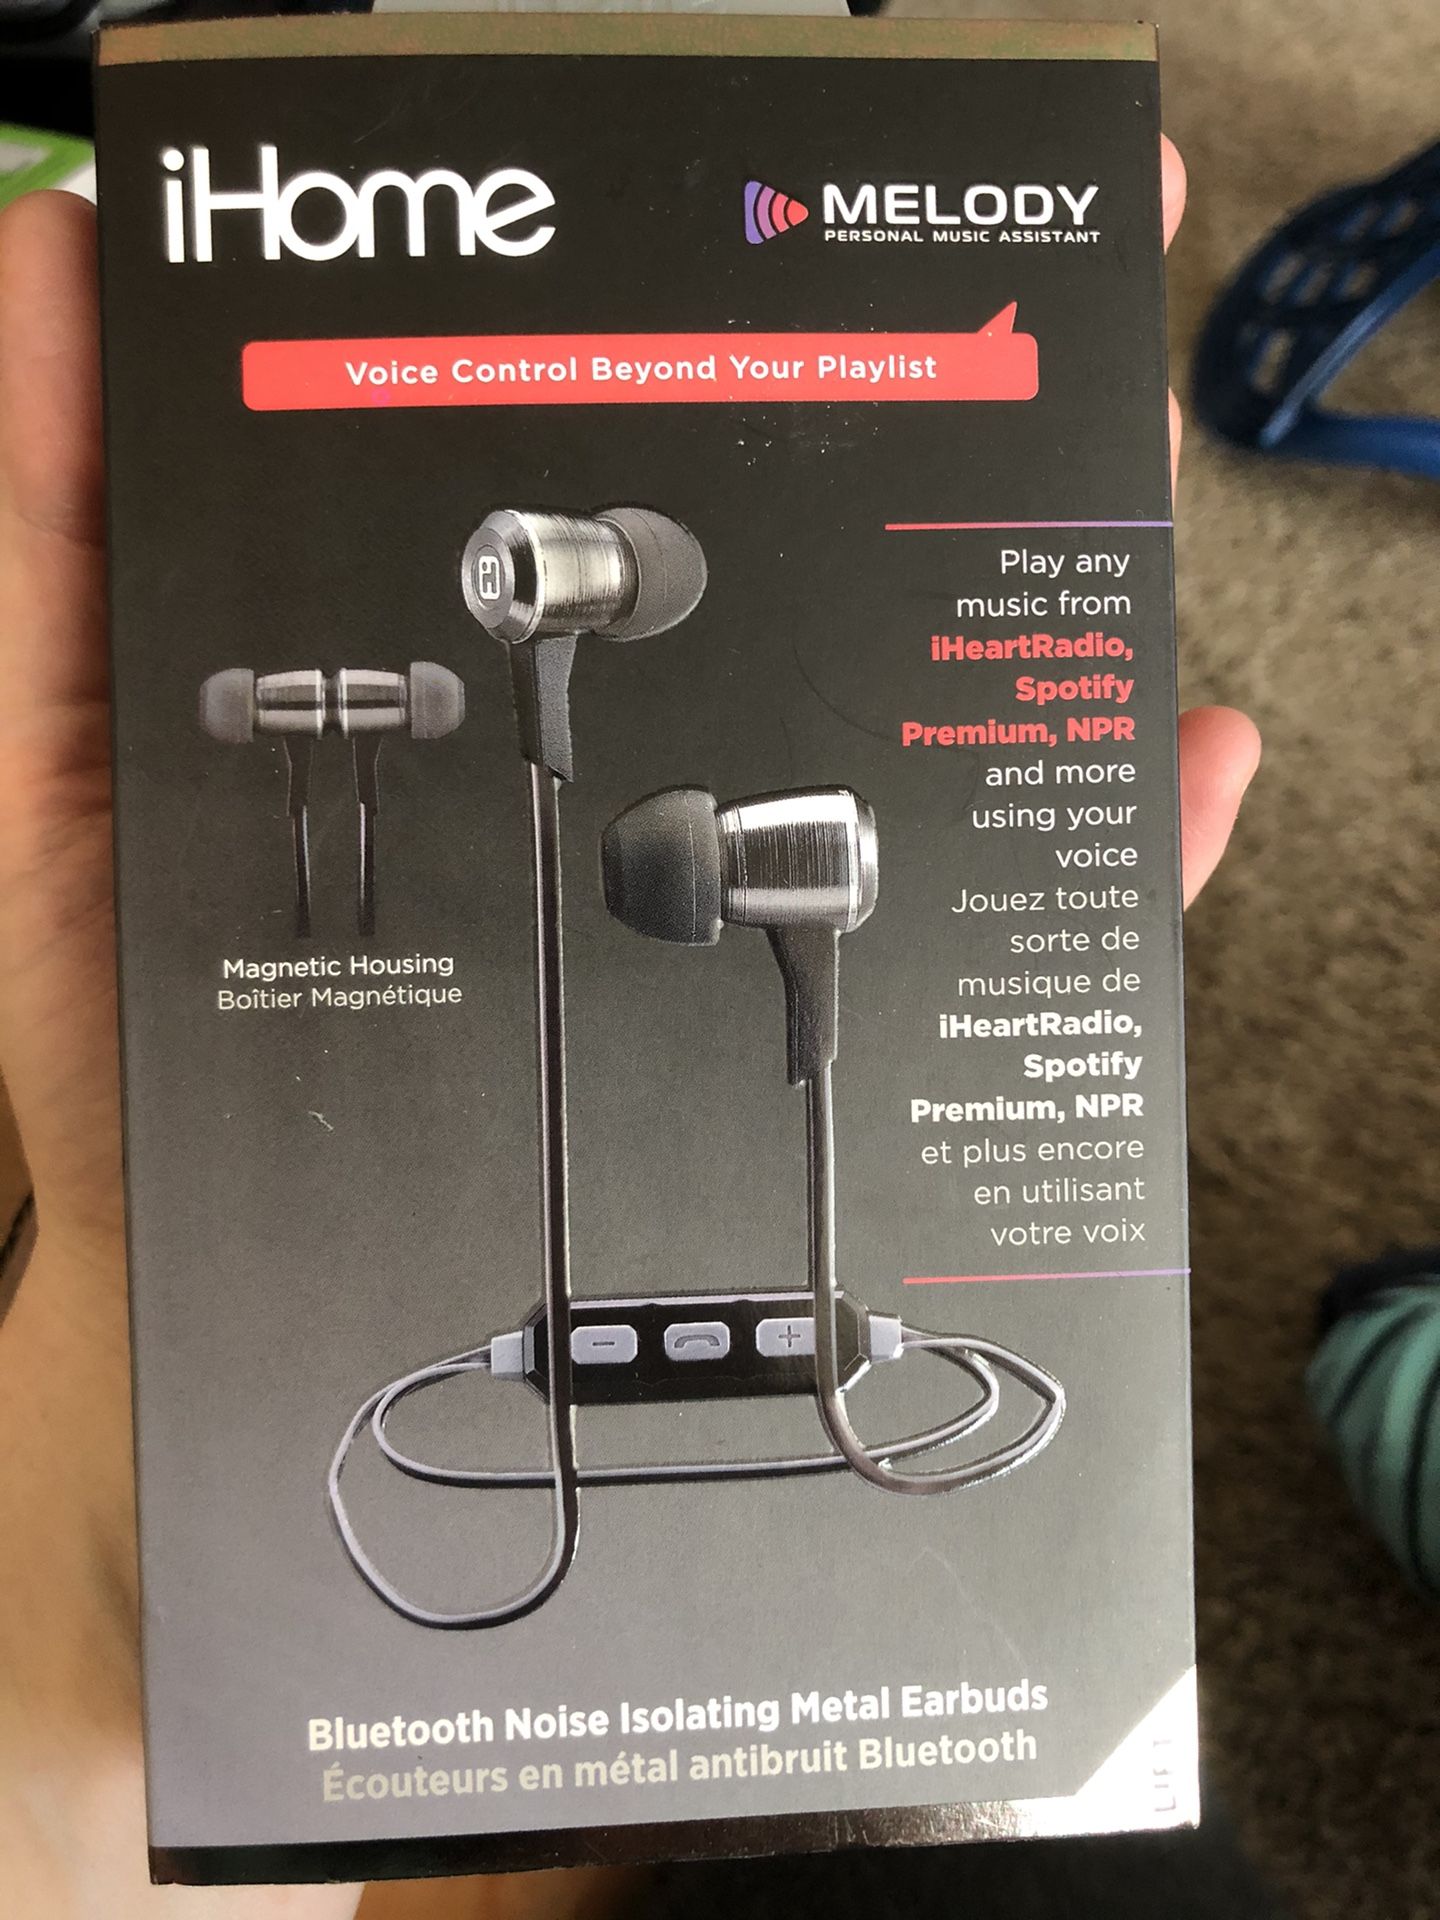 Bluetooth noise isolating metal earbuds